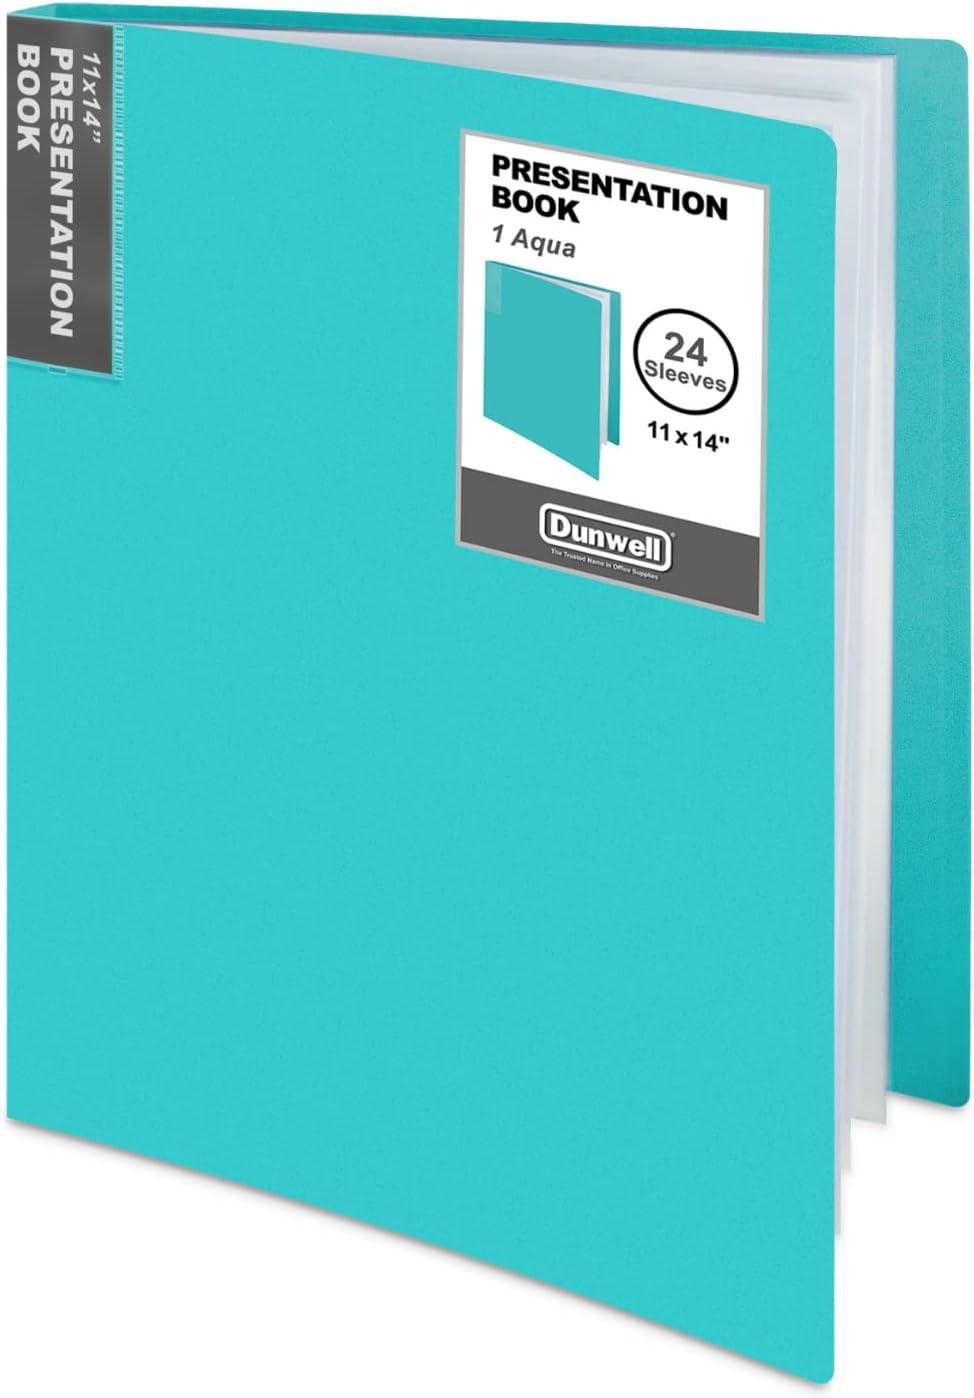 Dunwell Binder with Plastic Sleeves - (Aqua, 1 Pack), 24-Pocket Bound Presentation Book with Clear Sleeves, Sheet Protector Binder Displays 48 Pages